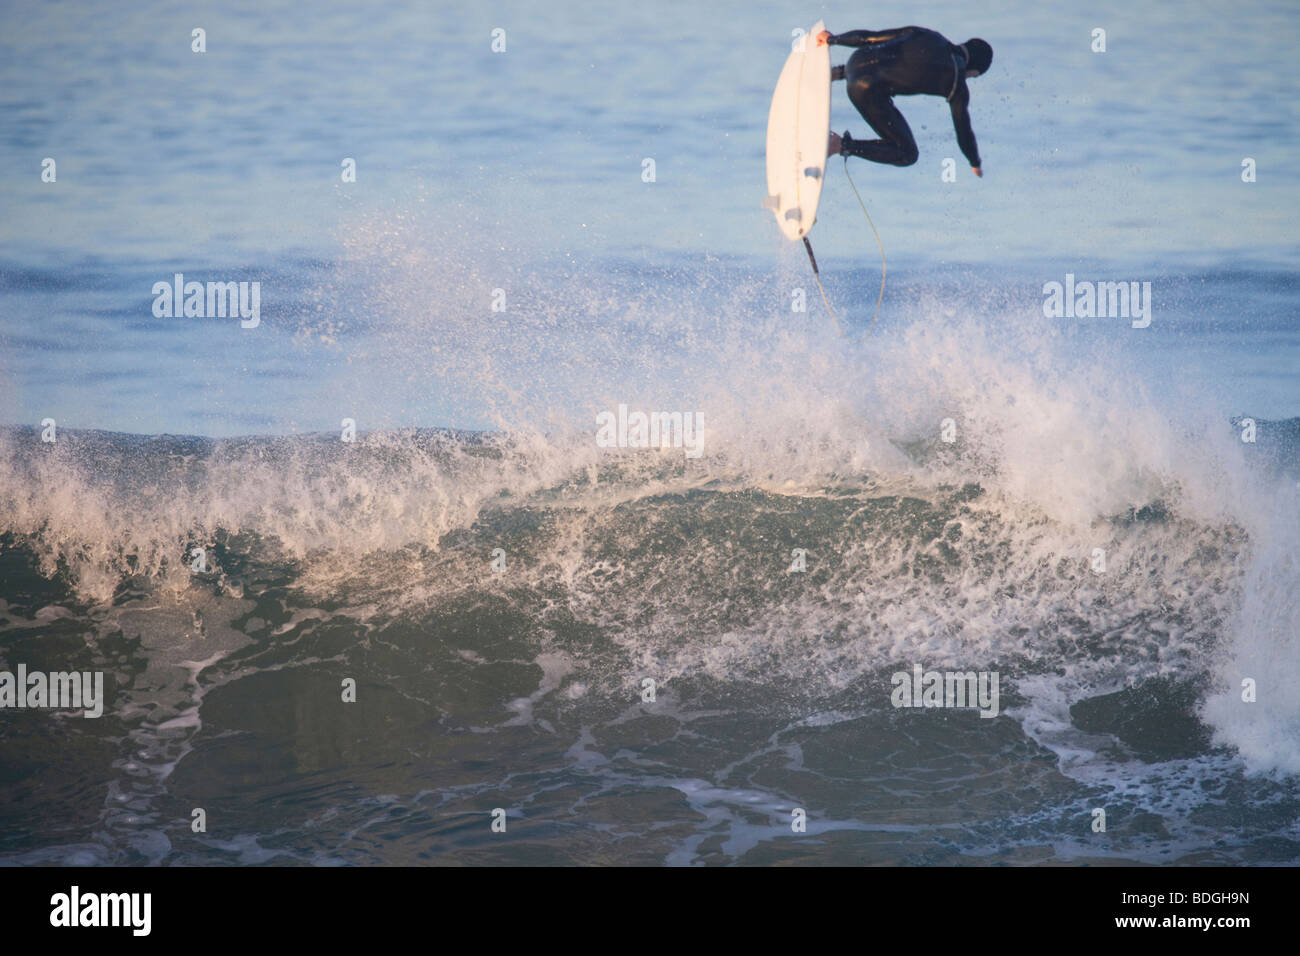 Surfer catching air off the top of a wave. Stock Photo